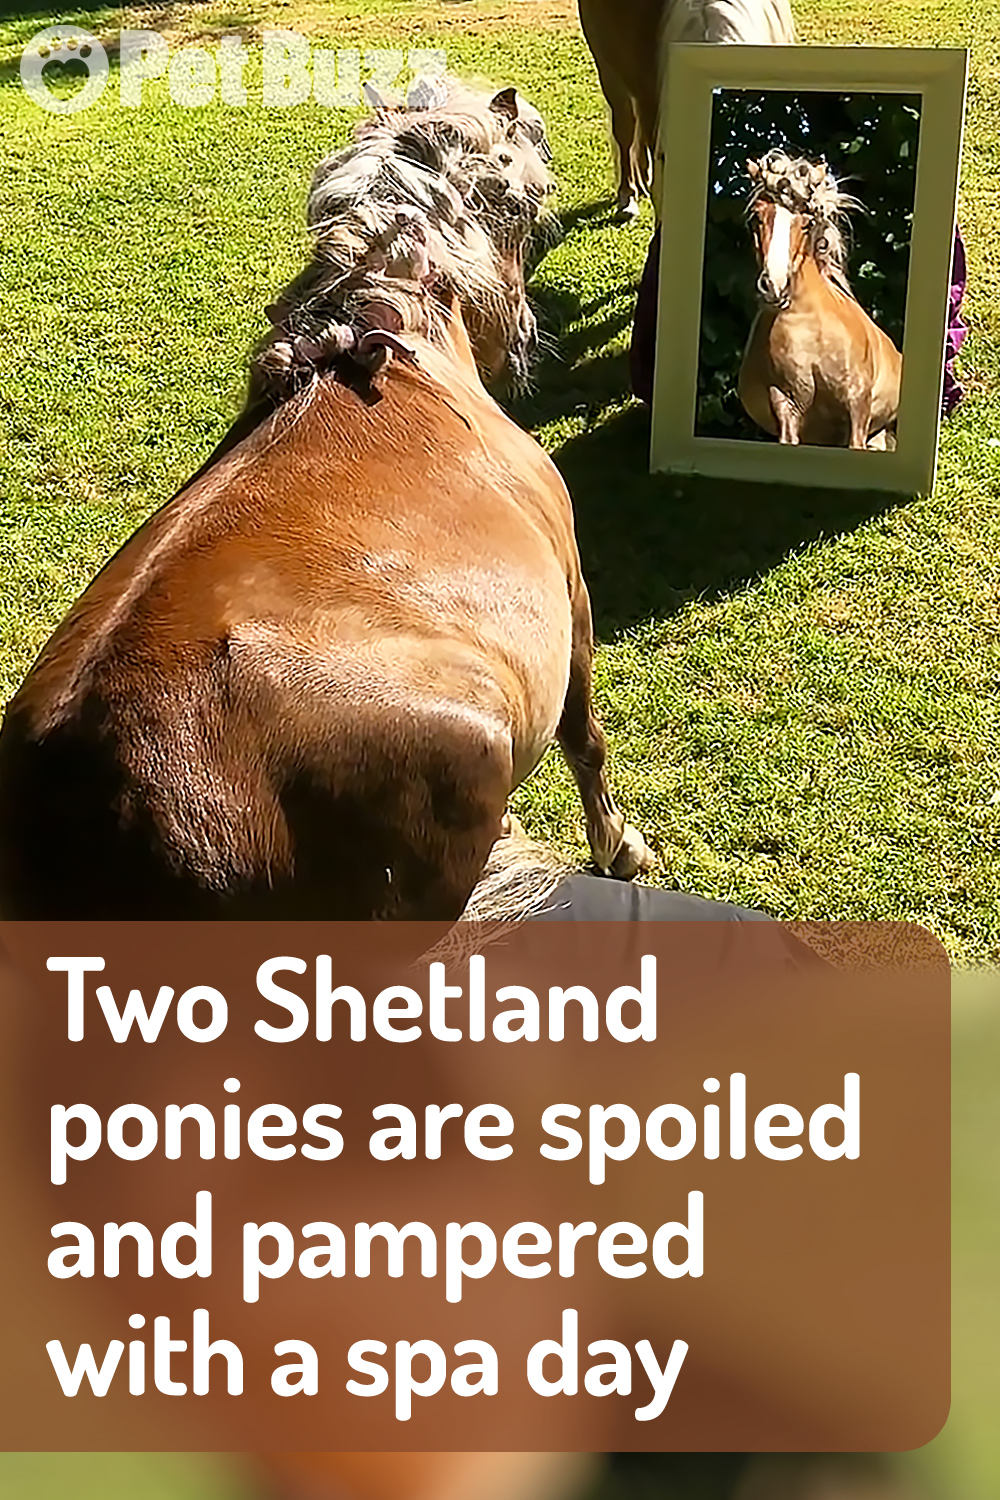 Two Shetland ponies are spoiled and pampered with a spa day